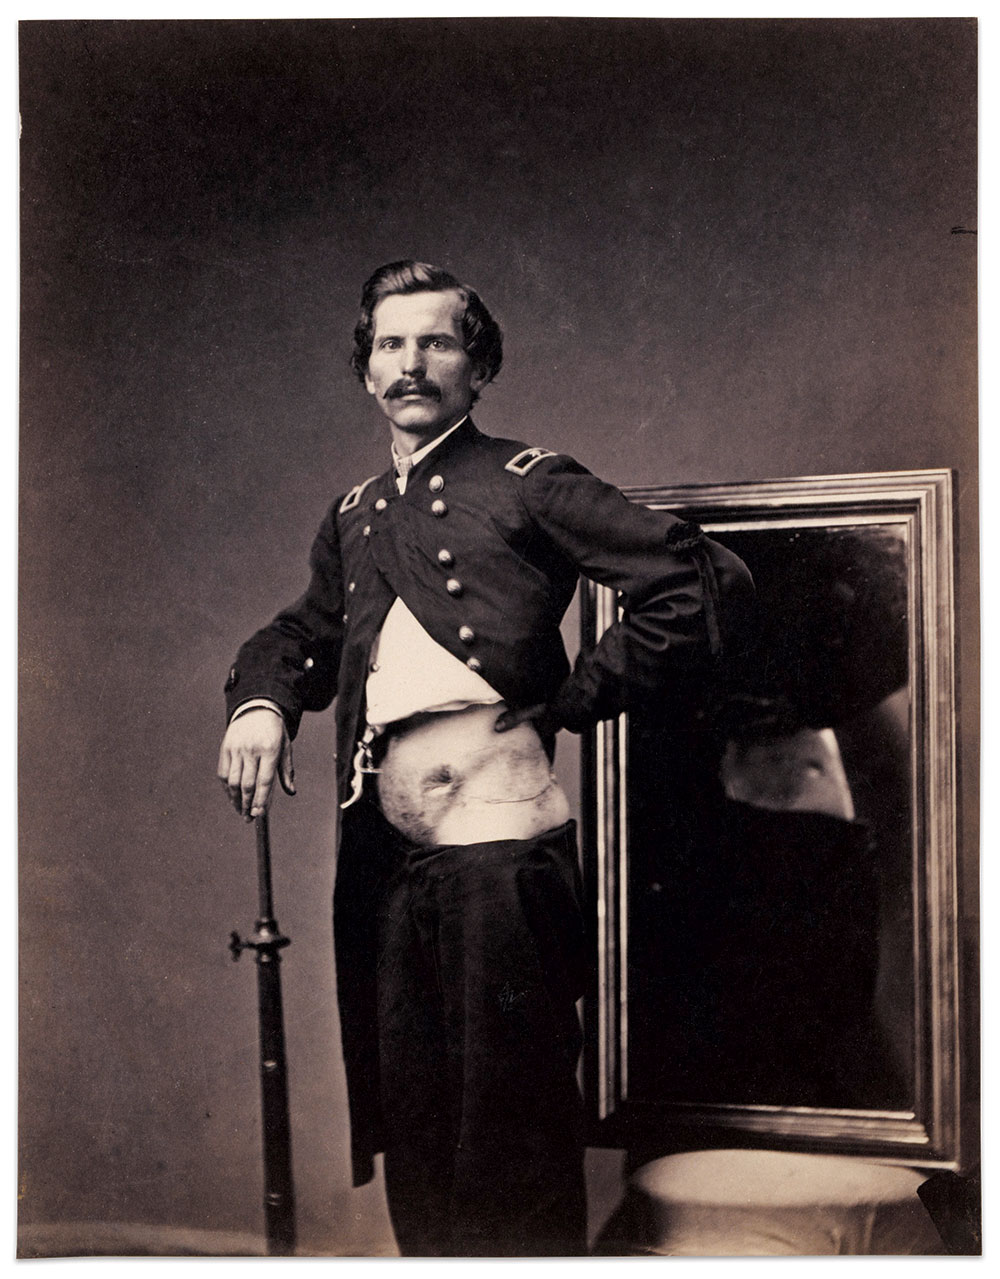 This often reproduced portrait of Barnum documents the successful surgery for the debilitating abdominal wound received at Malvern Hill. Albumen print by William Bell for the U.S. Army Medical Department. Smithsonian American Art Museum.